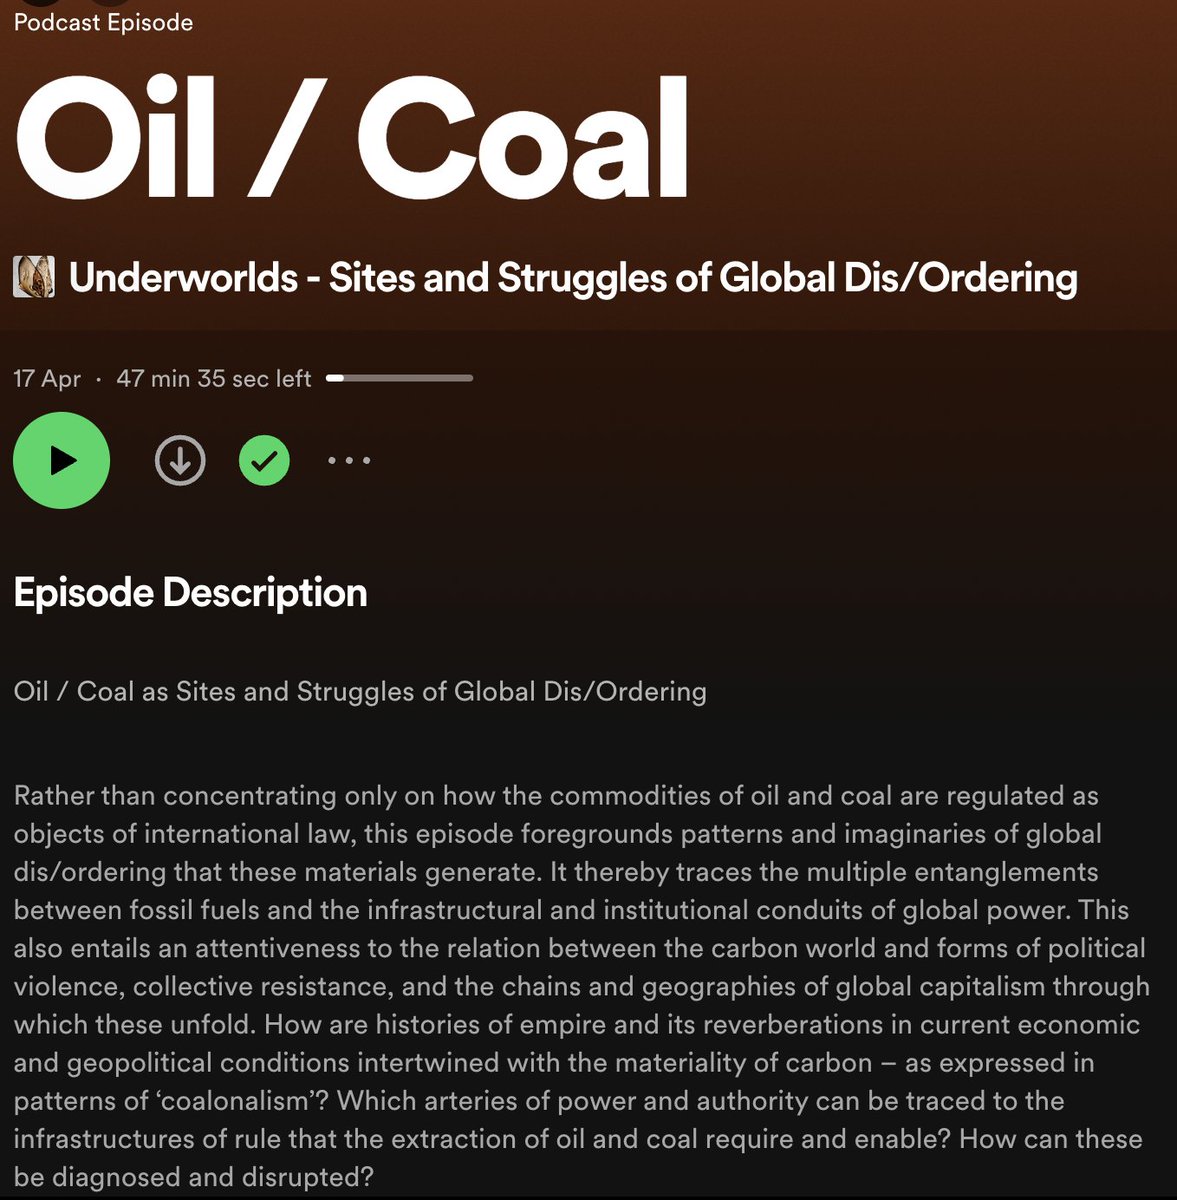 Check out our second episode of the #Underworlds Podcast with brilliant @kulamadayil and On Barak on *Oil / Coal as Sites and Struggles of Global Dis/Ordering* 👇 open.spotify.com/show/7Ao1I3QfM…